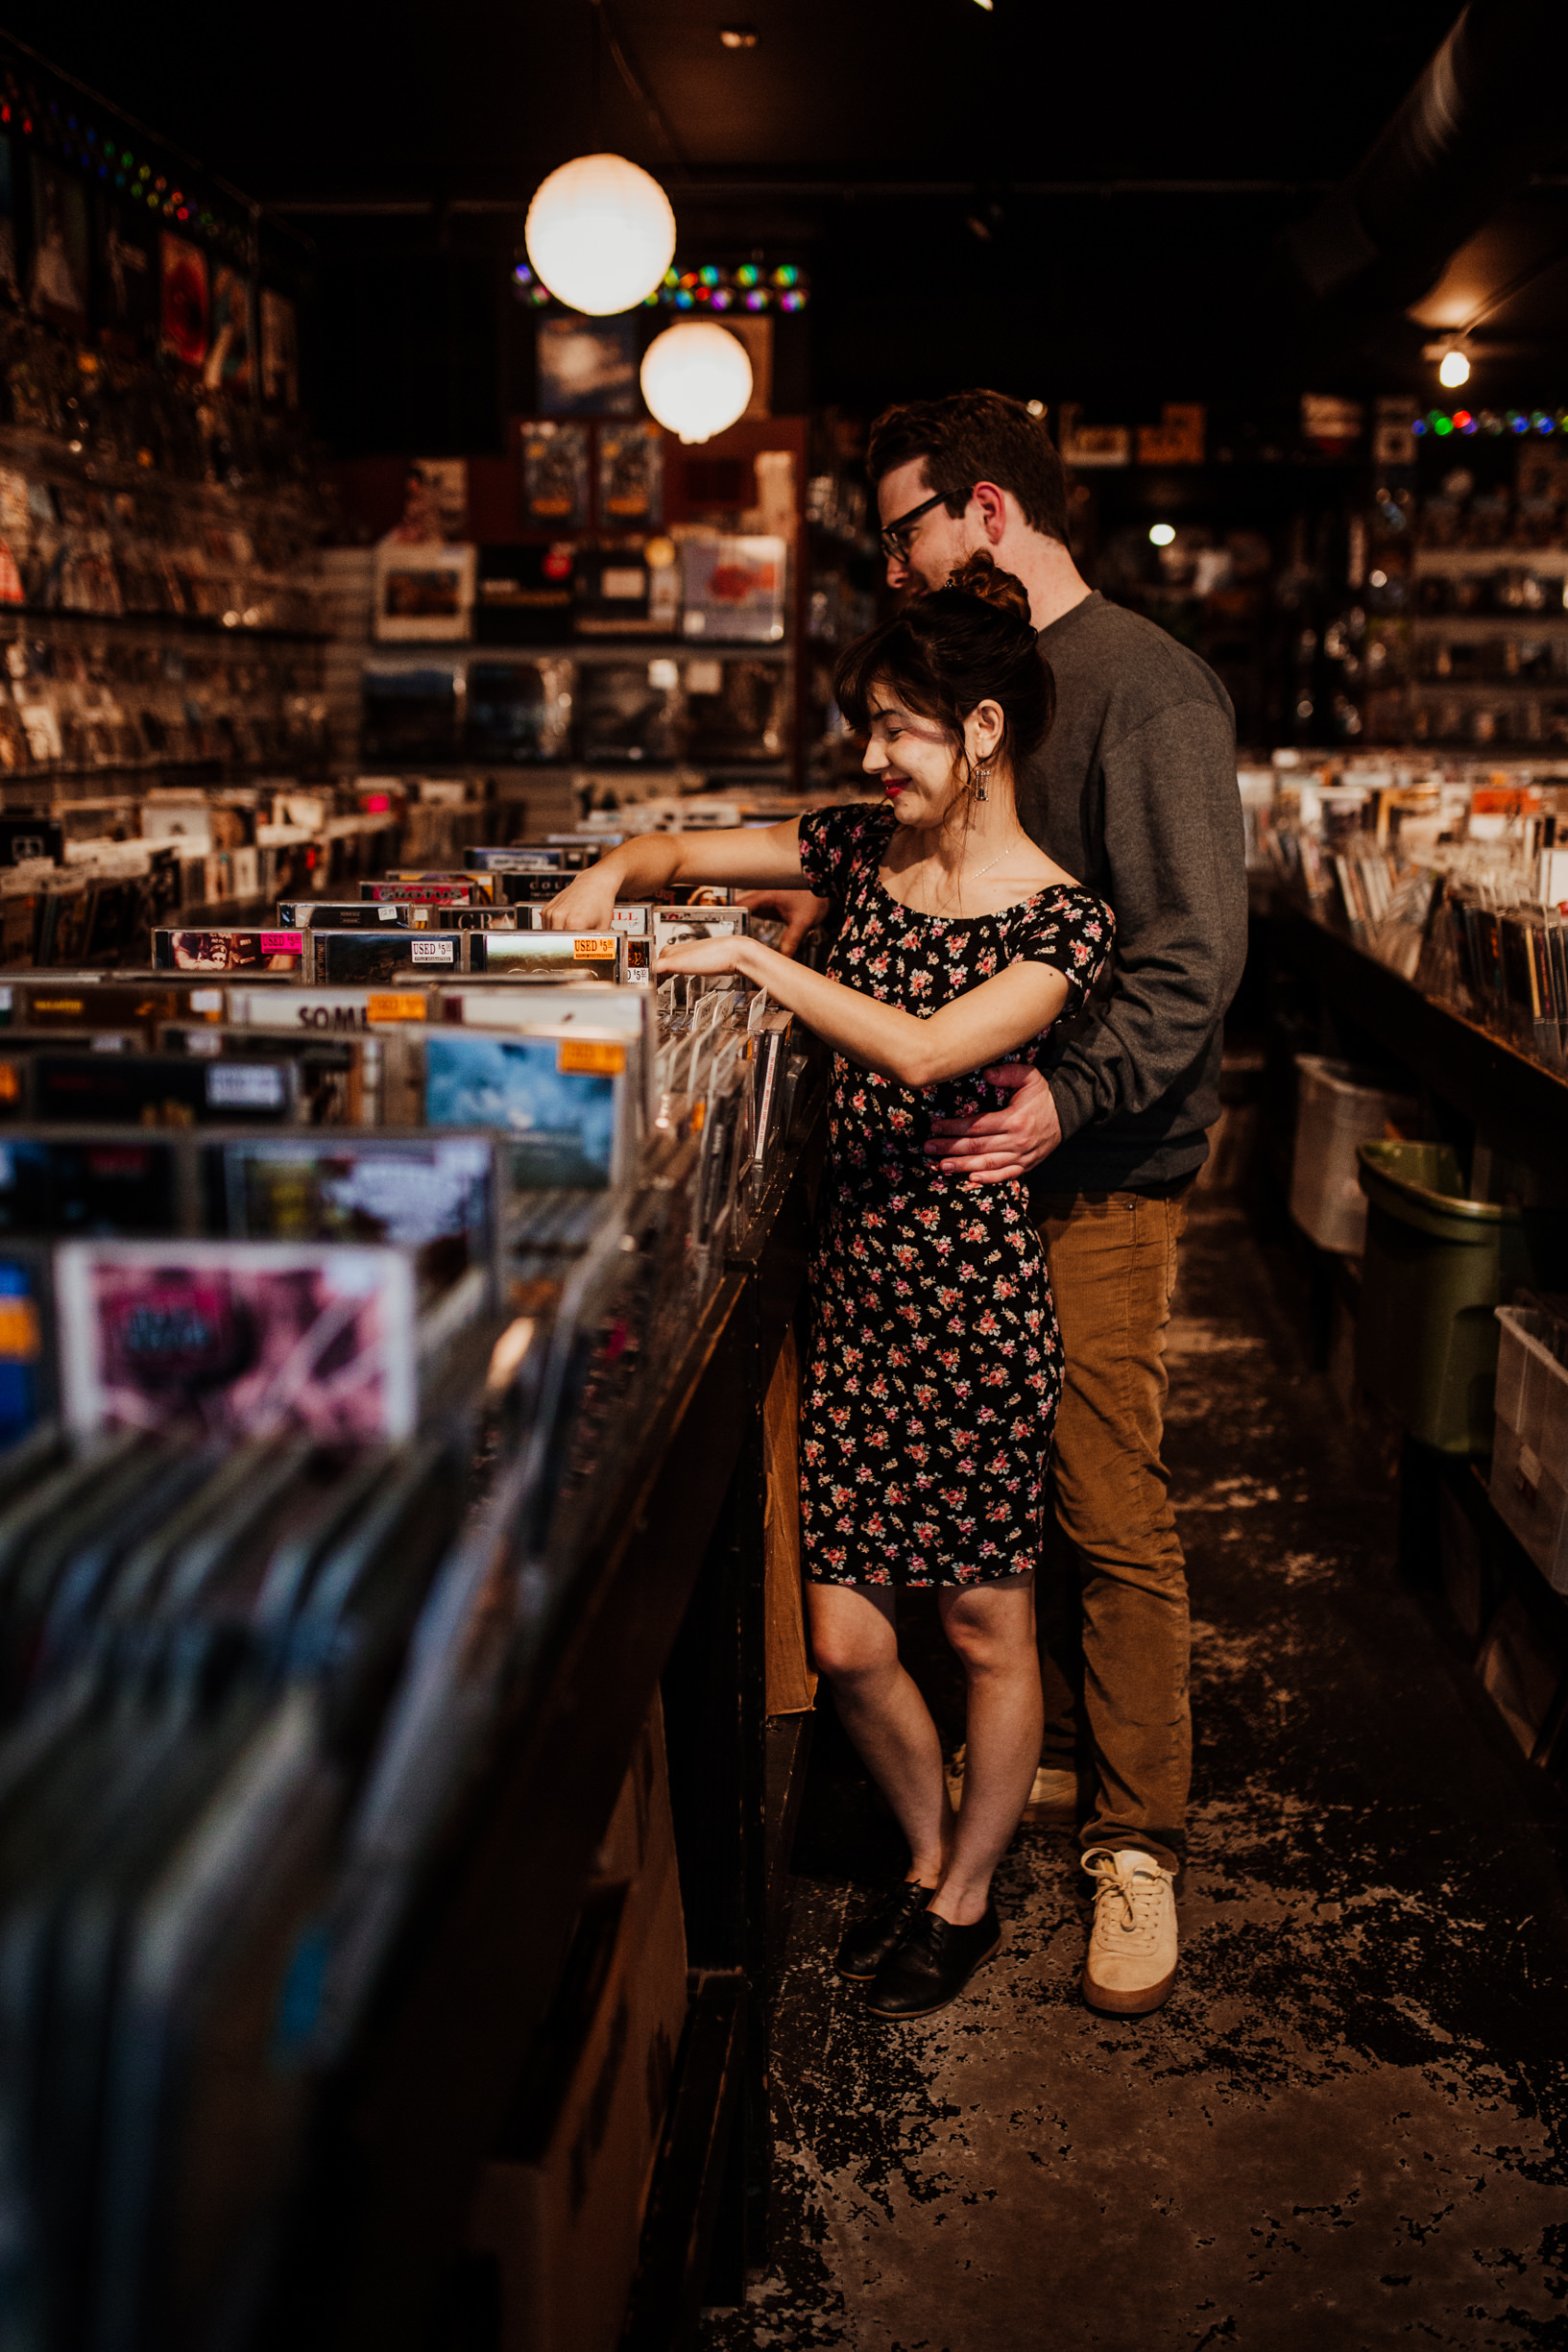 louisville-engagement-photographer-record-store-in-home-session-crystal-ludwick-photo (53 of 53).jpg